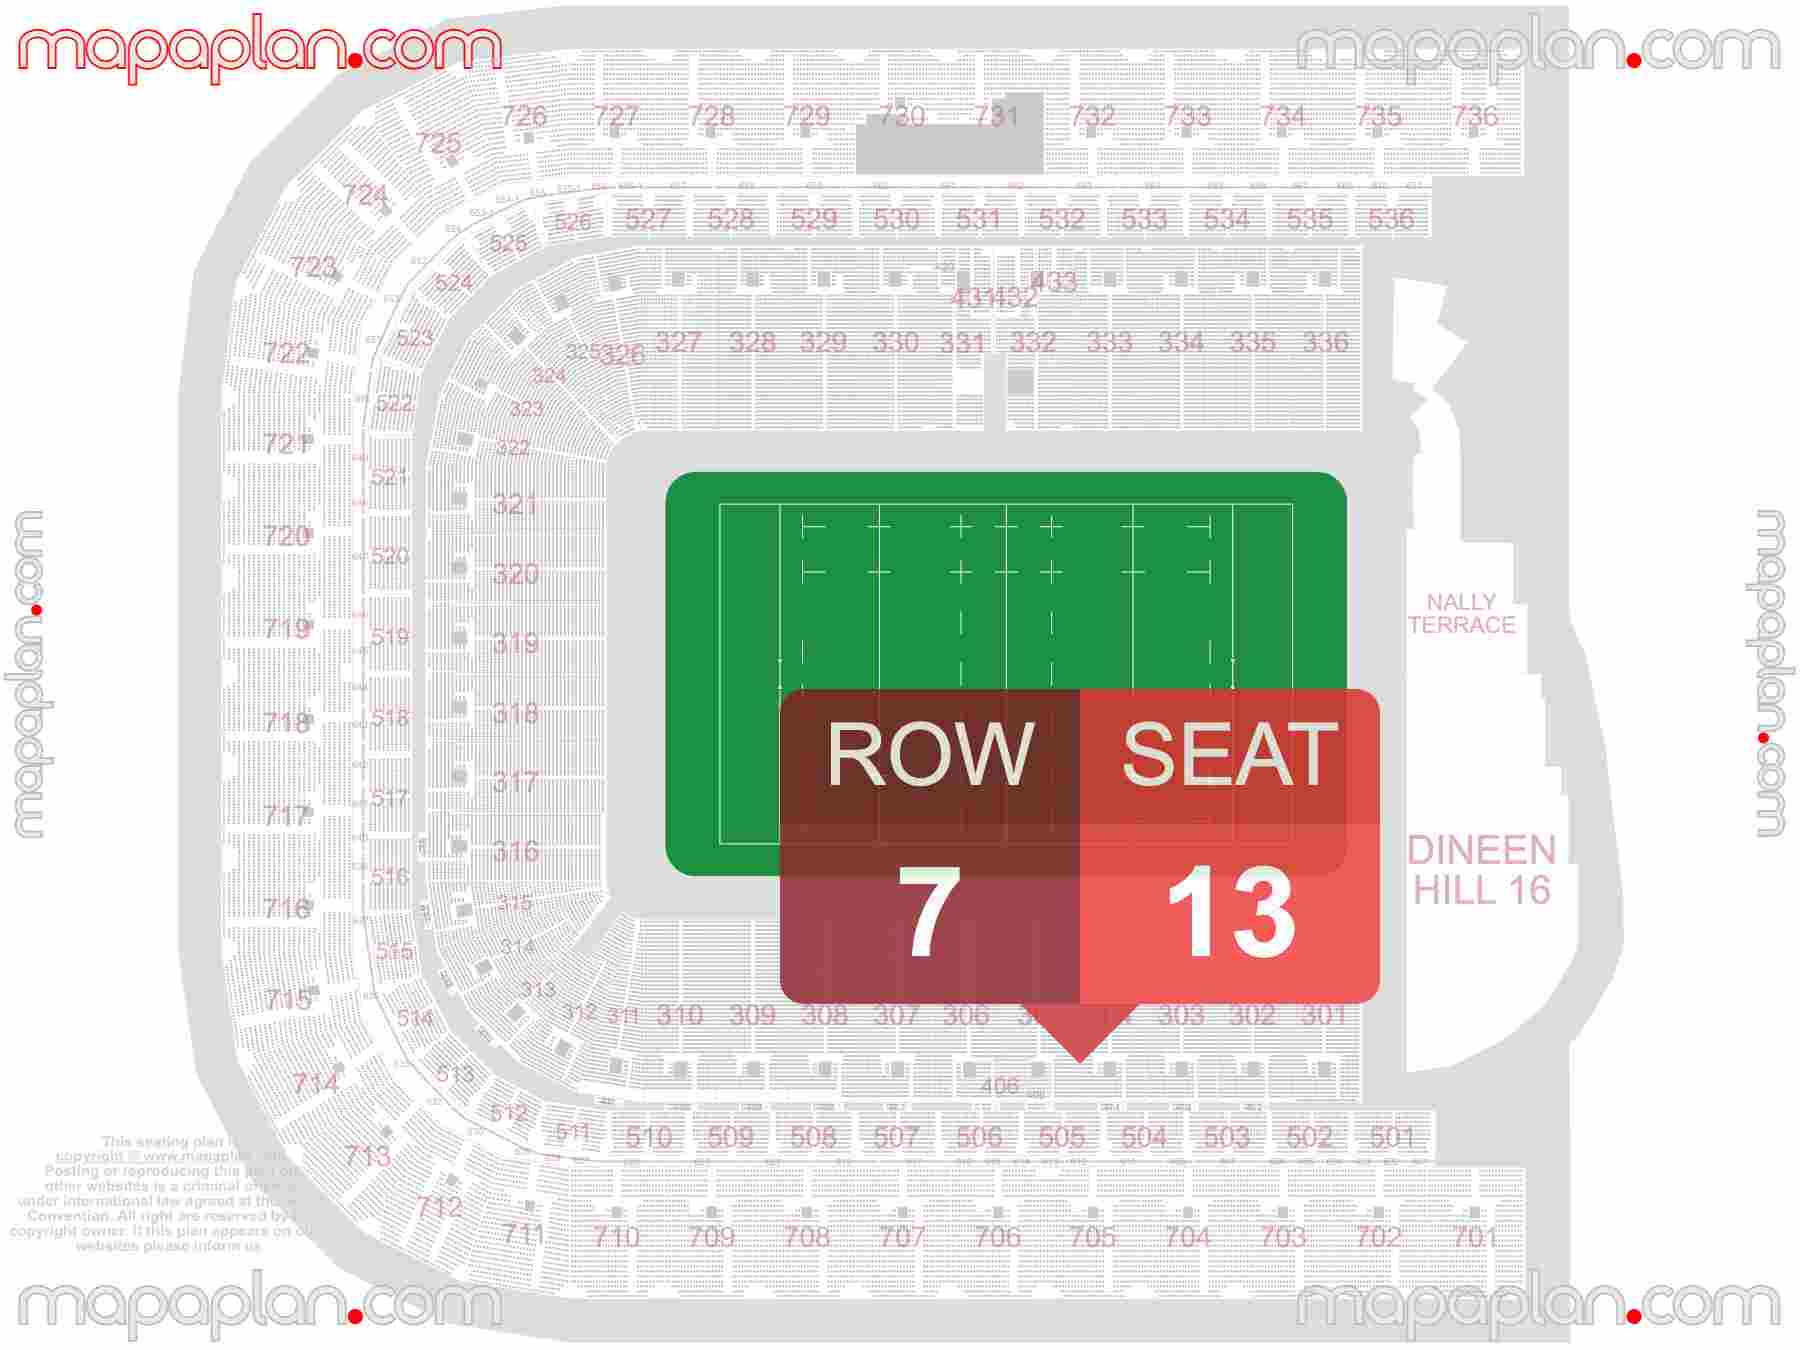 Dublin Croke Park Stadium seating plan Rugby detailed seat numbers and row numbering plan with interactive map map layout